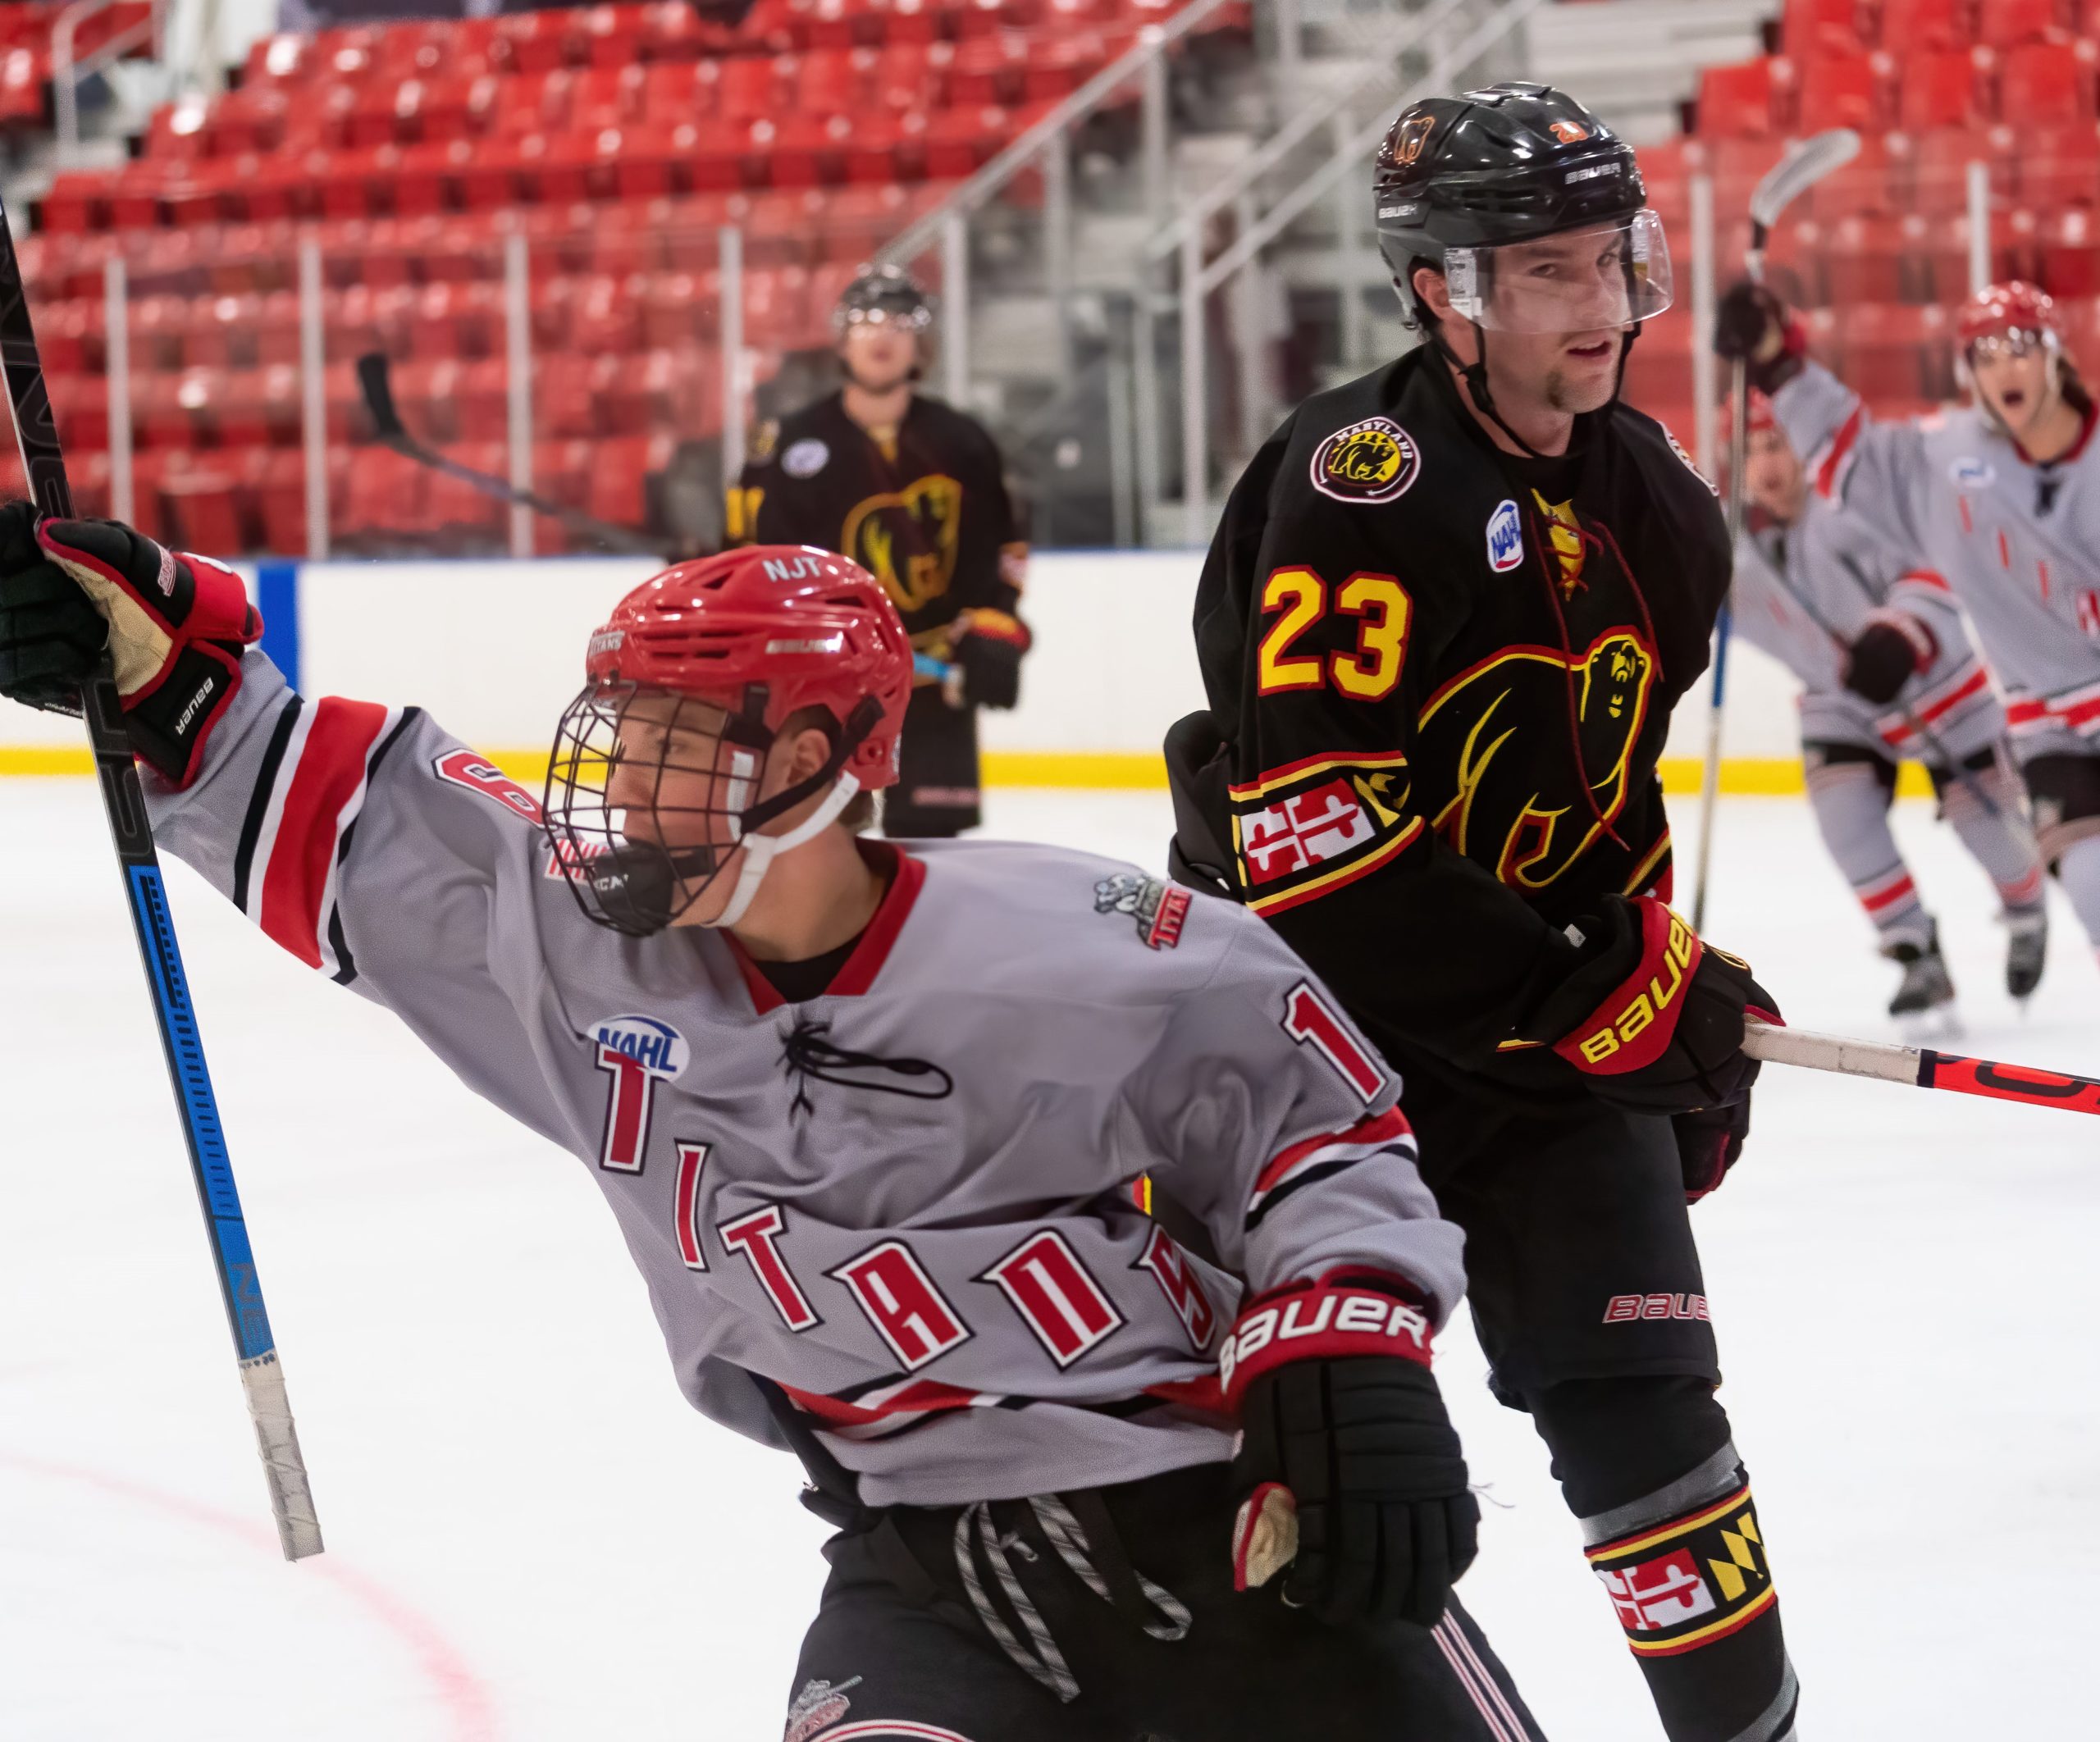 Weekend Preview: 01/08 – 01/09/; Titans resume play and host Black Bears